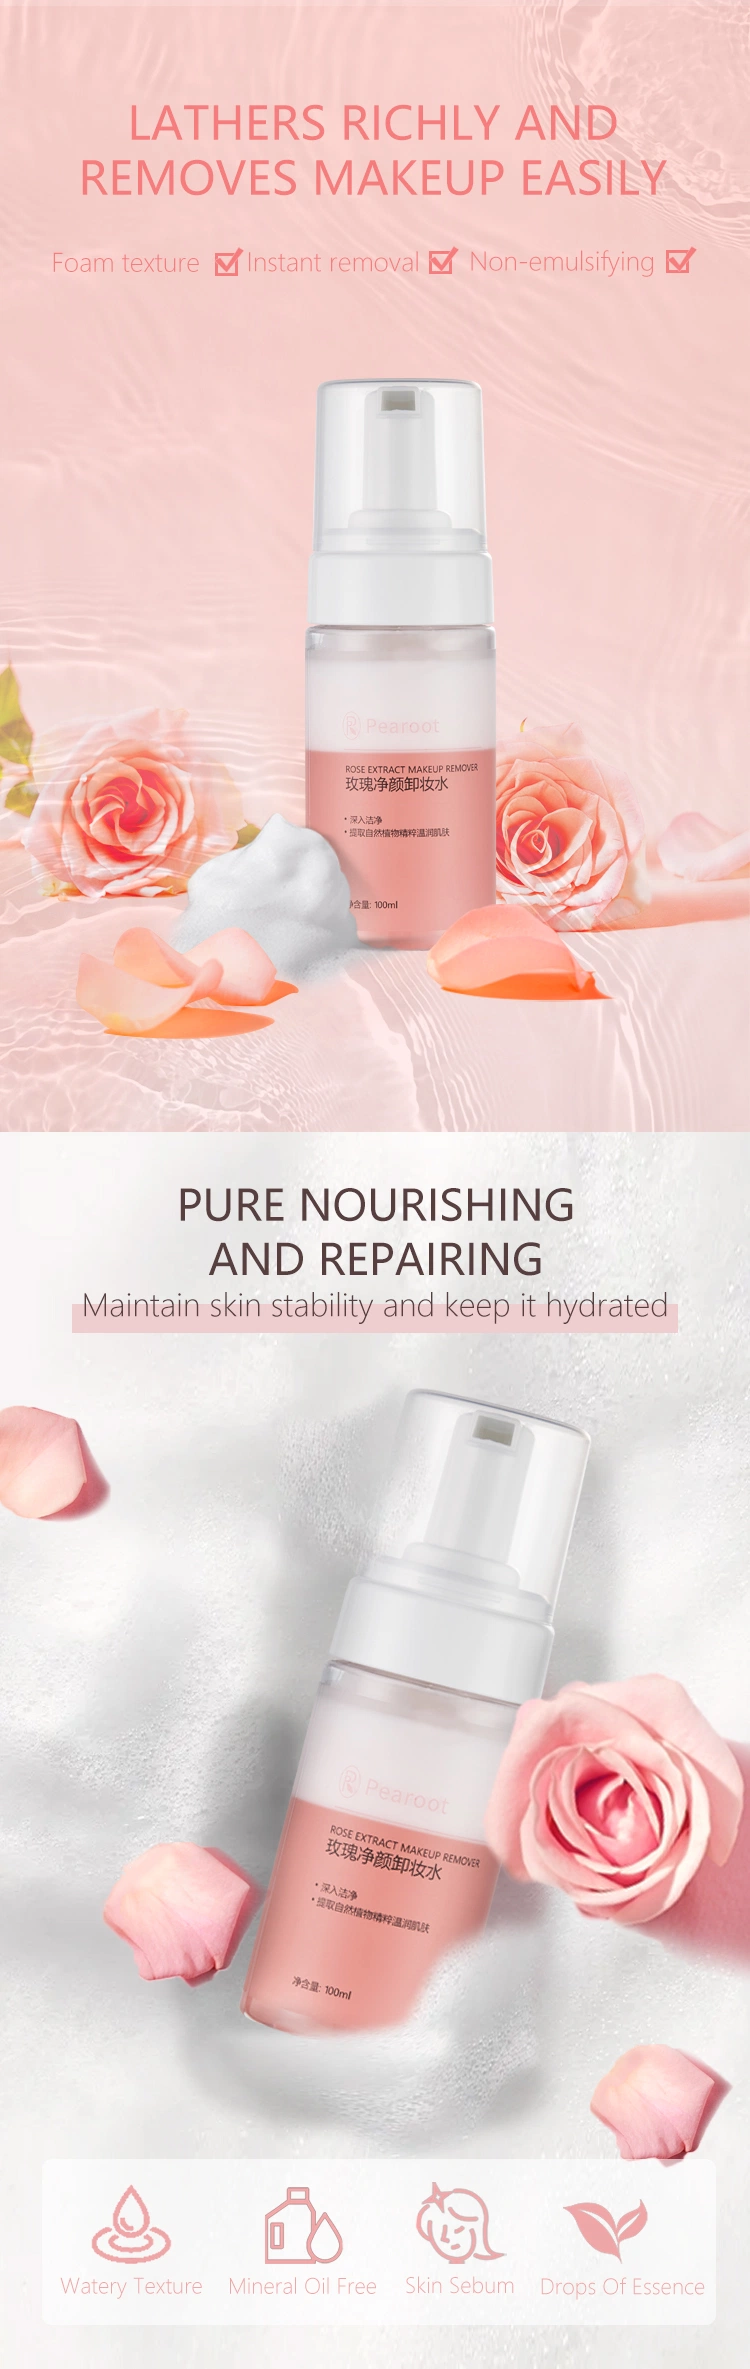 Rose Deep Gentle Purifying Cleansing Makeup Remover